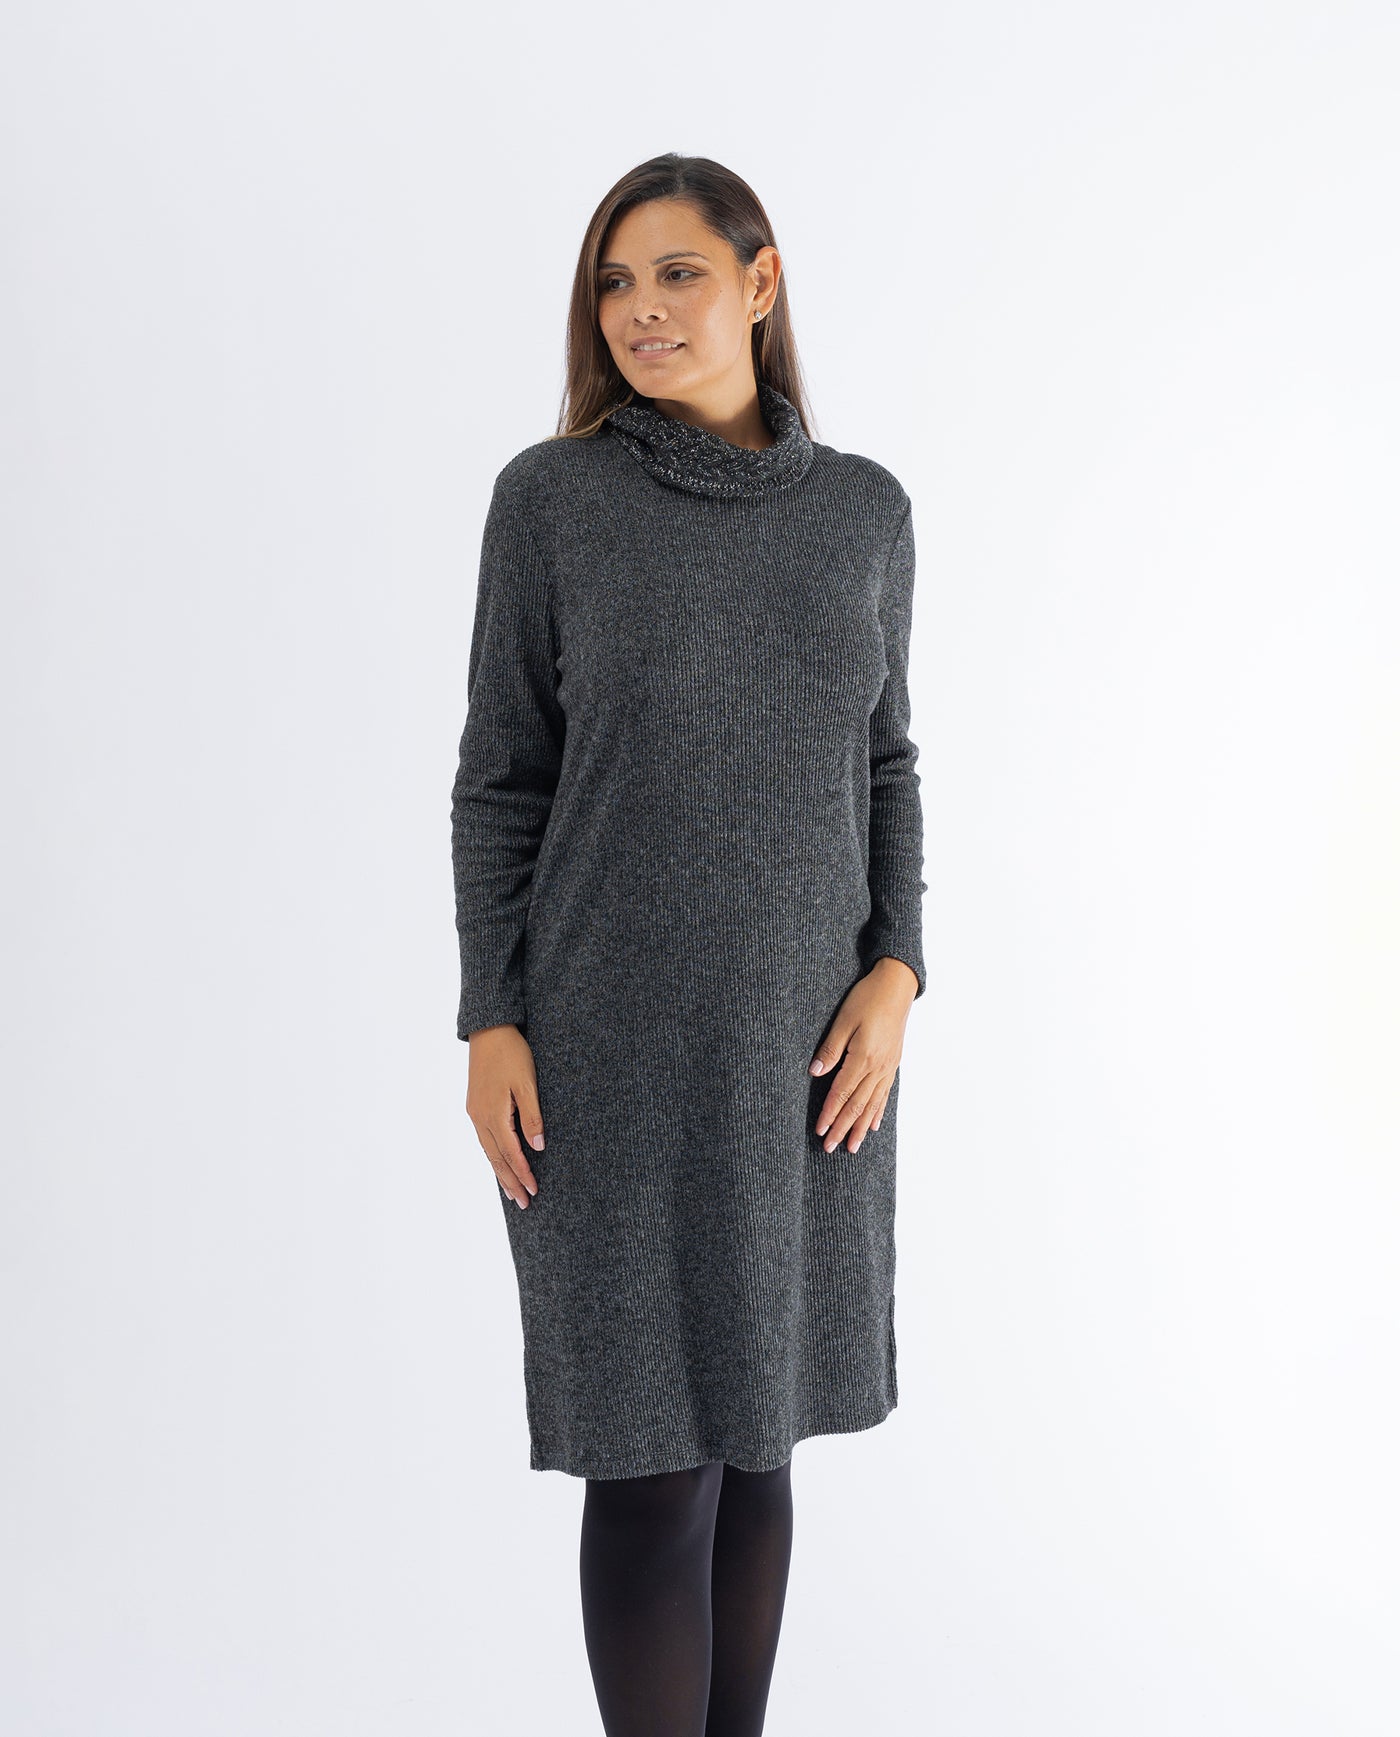 KNITTED DRESS WITH CROPPED NECK WITH DARK GRAY SEQUINS